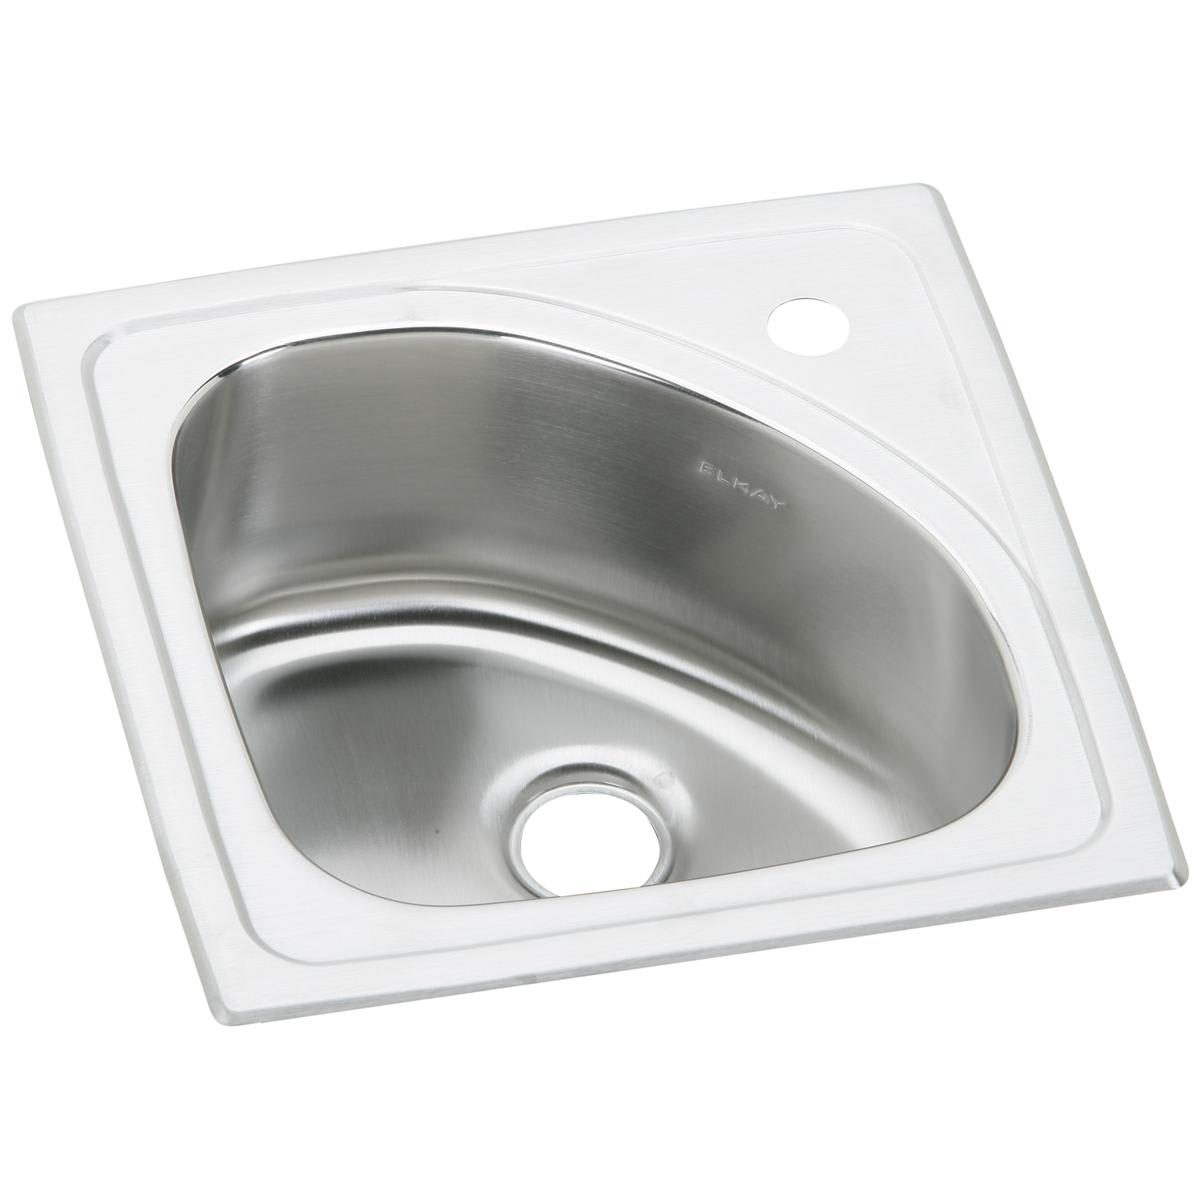 Lonsince Bar Sink 17 X 19 inch,Gold Bar Sink Drop-in,Small Bar Sink,RV Sink,Small Stainless Steel Sink - 3